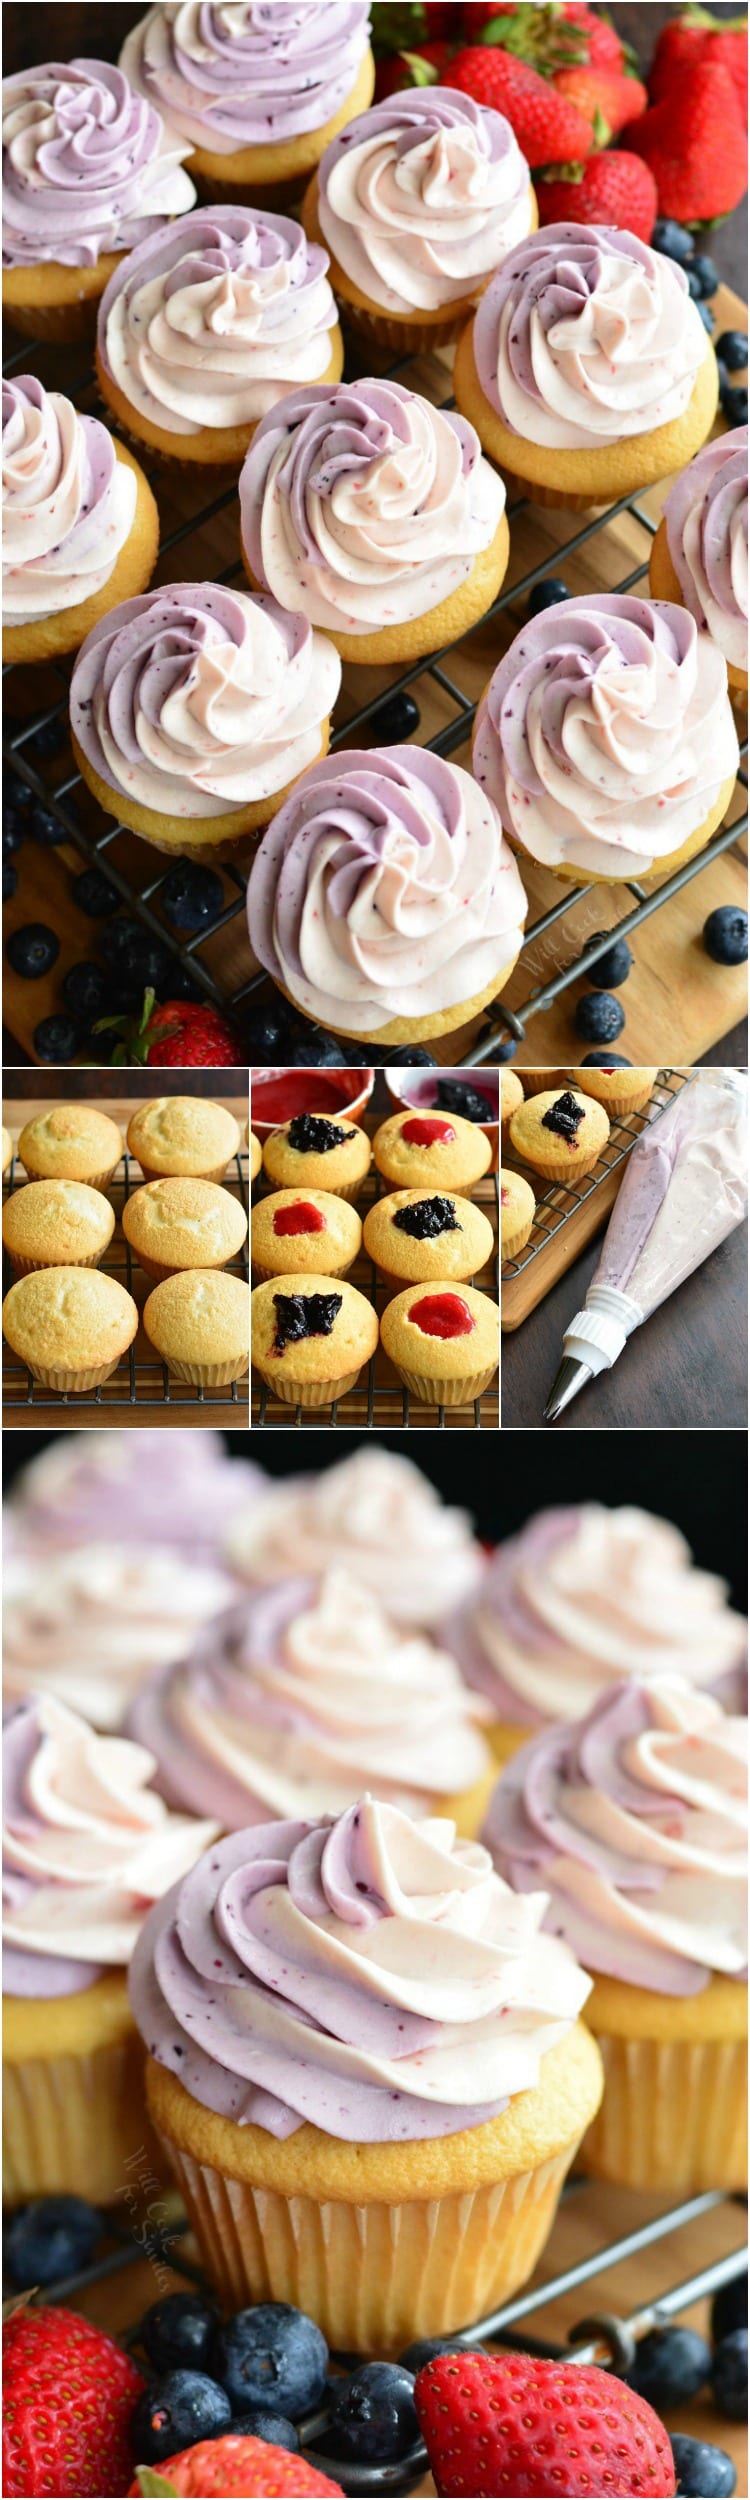 1st photo Berry Filled Cupcakes, 2nd photo filling inside of cupcakes with berry jelly, 3rd picture frosted cupcakes on a cooling rack 